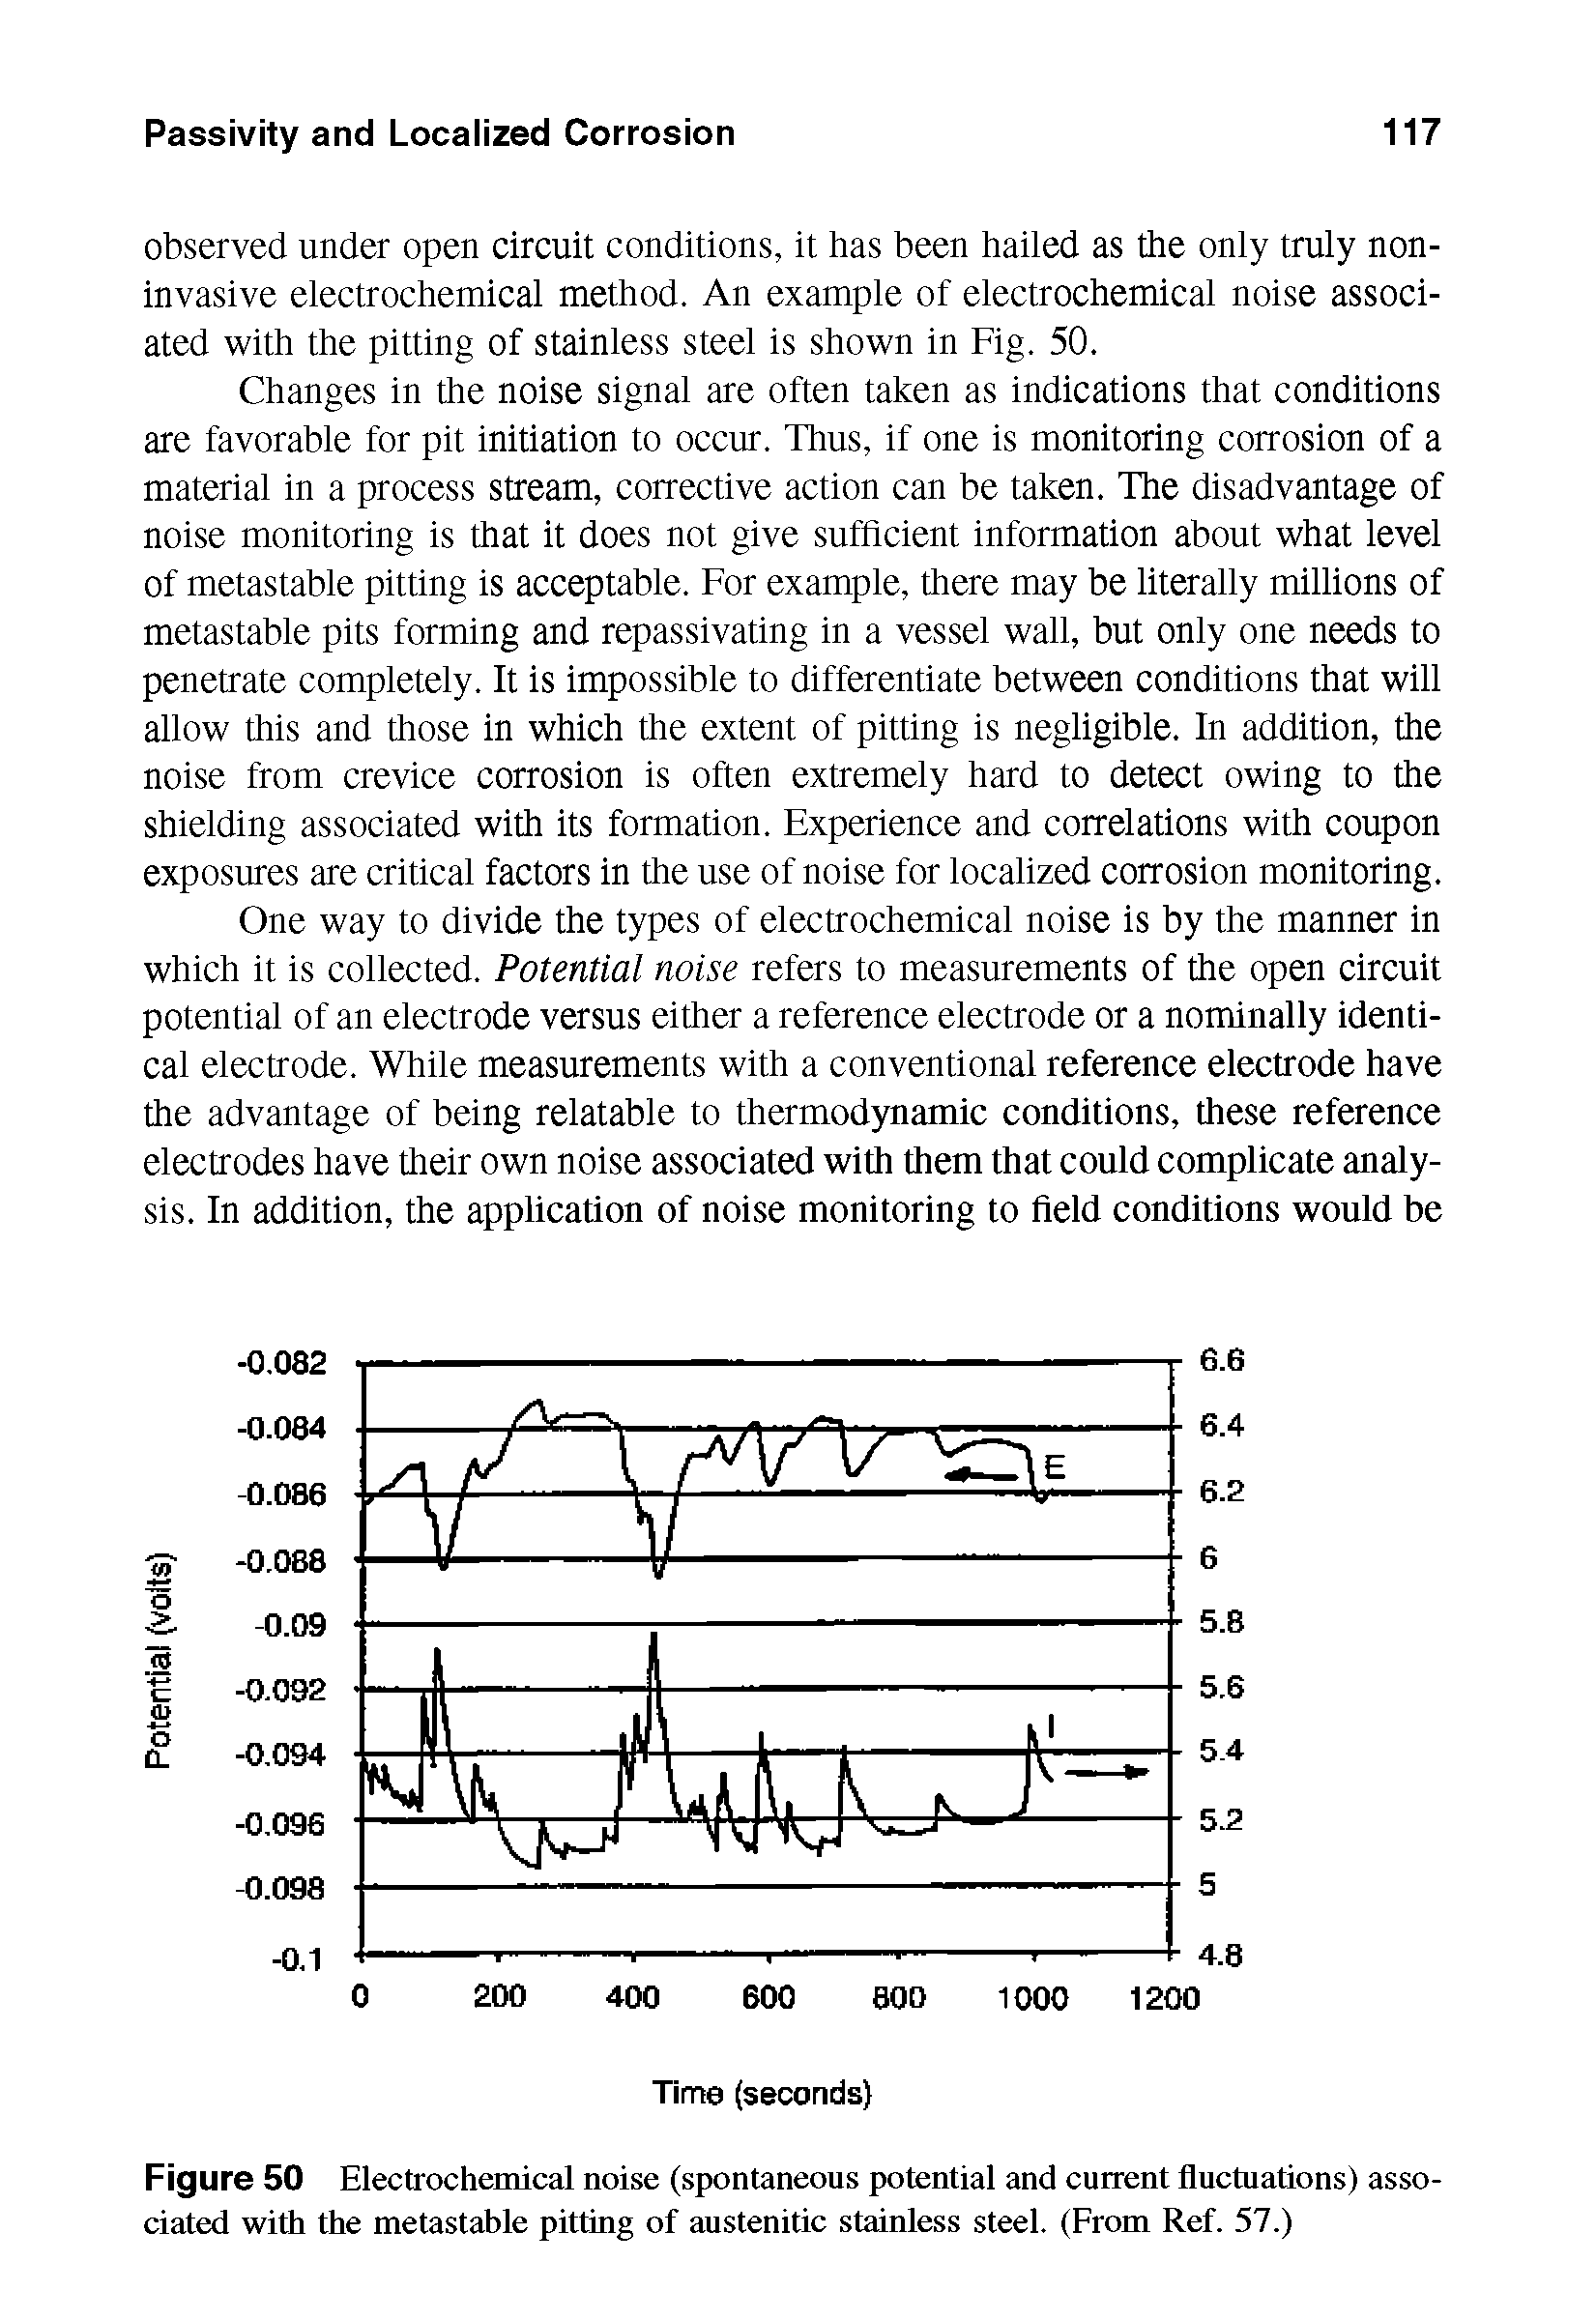 Figure 50 Electrochemical noise (spontaneous potential and current fluctuations) associated with the metastable pitting of austenitic stainless steel. (From Ref. 57.)...